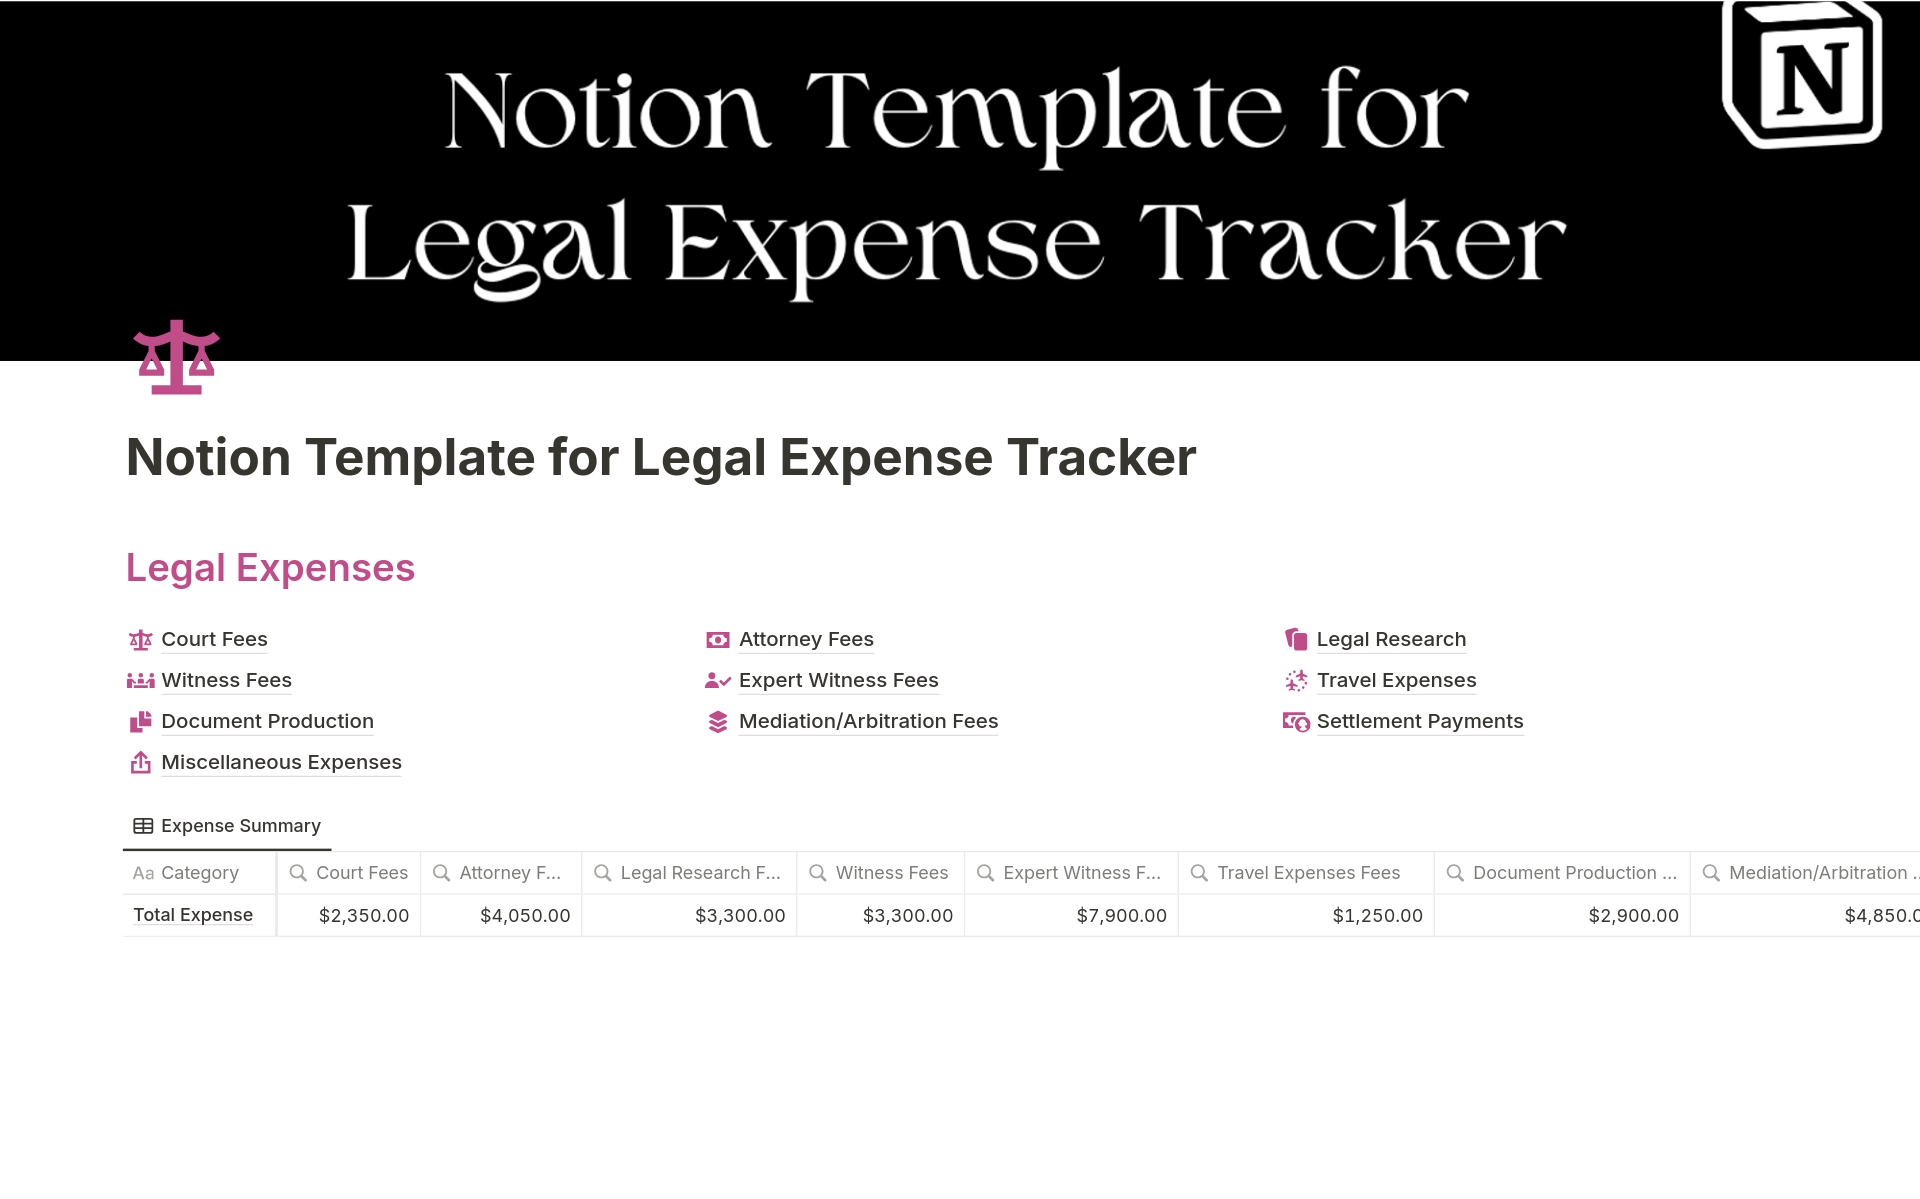 The Legal Expense Tracker is a comprehensive tool designed to help you manage and track your legal expenses efficiently. With this template, you can record and categorize various legal expenses incurred, monitor your budget, and stay organized throughout the legal process.